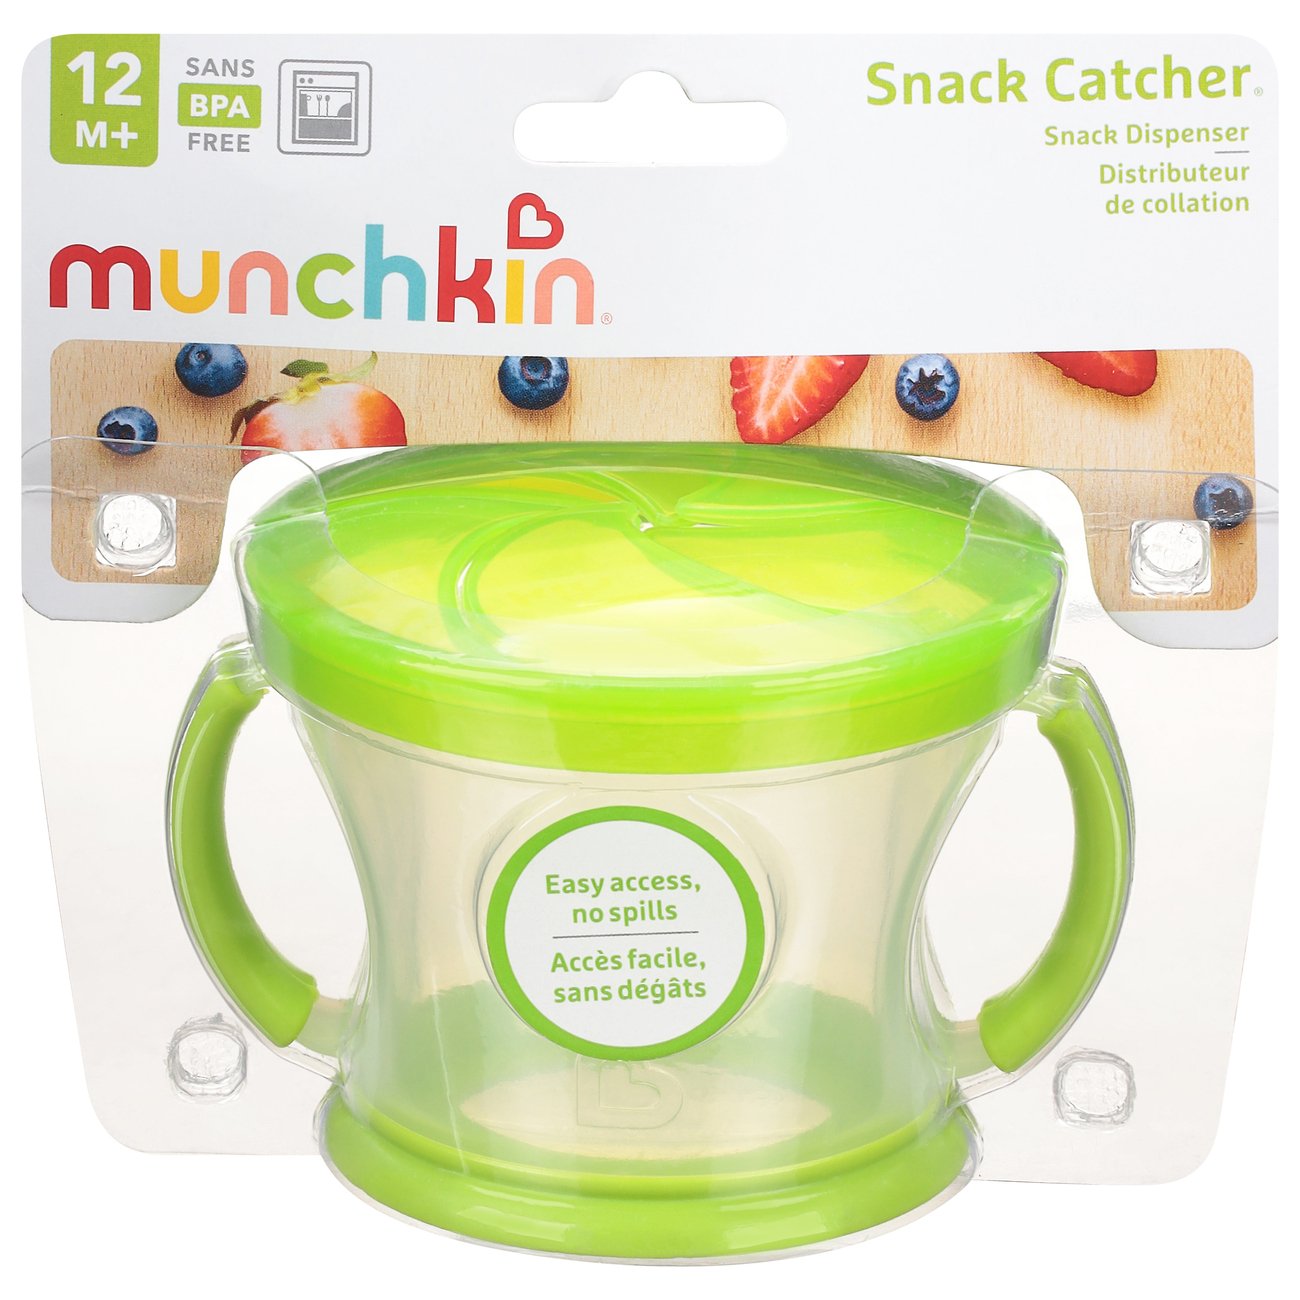 Munchkin Snack Catcher 9 Ounce 12+ Months color may vary